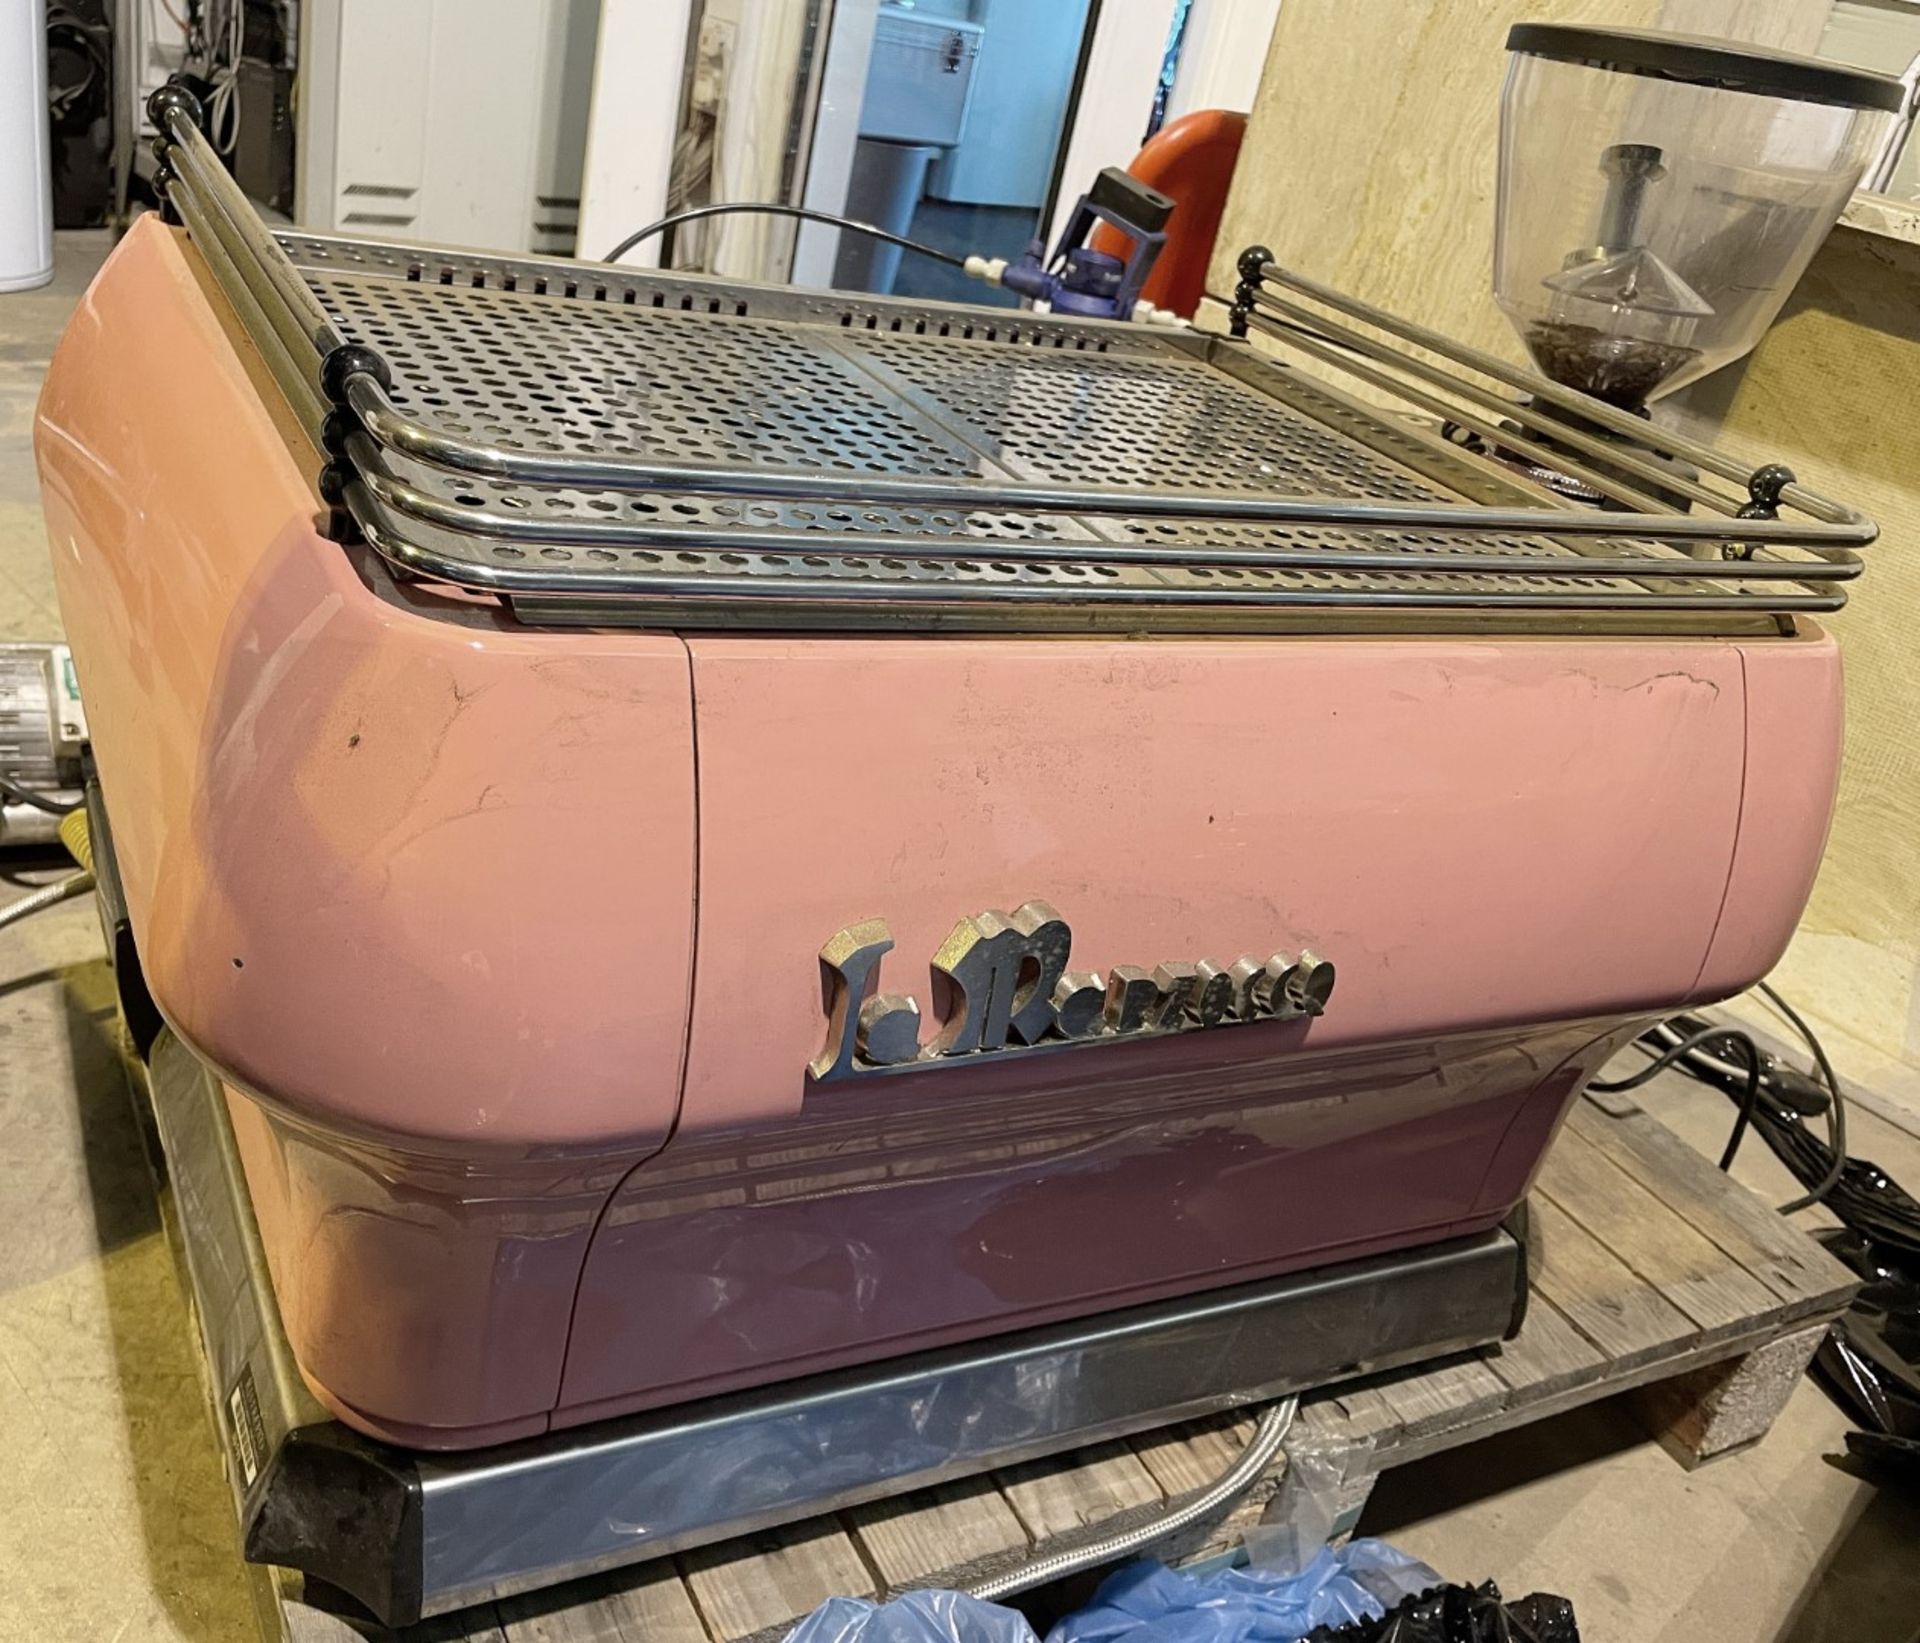 1 x LA MARZOCCA Commercial 2-Group Espresso Coffee Machine, In Baby Pink - Original RRP £10,000 - Image 21 of 23